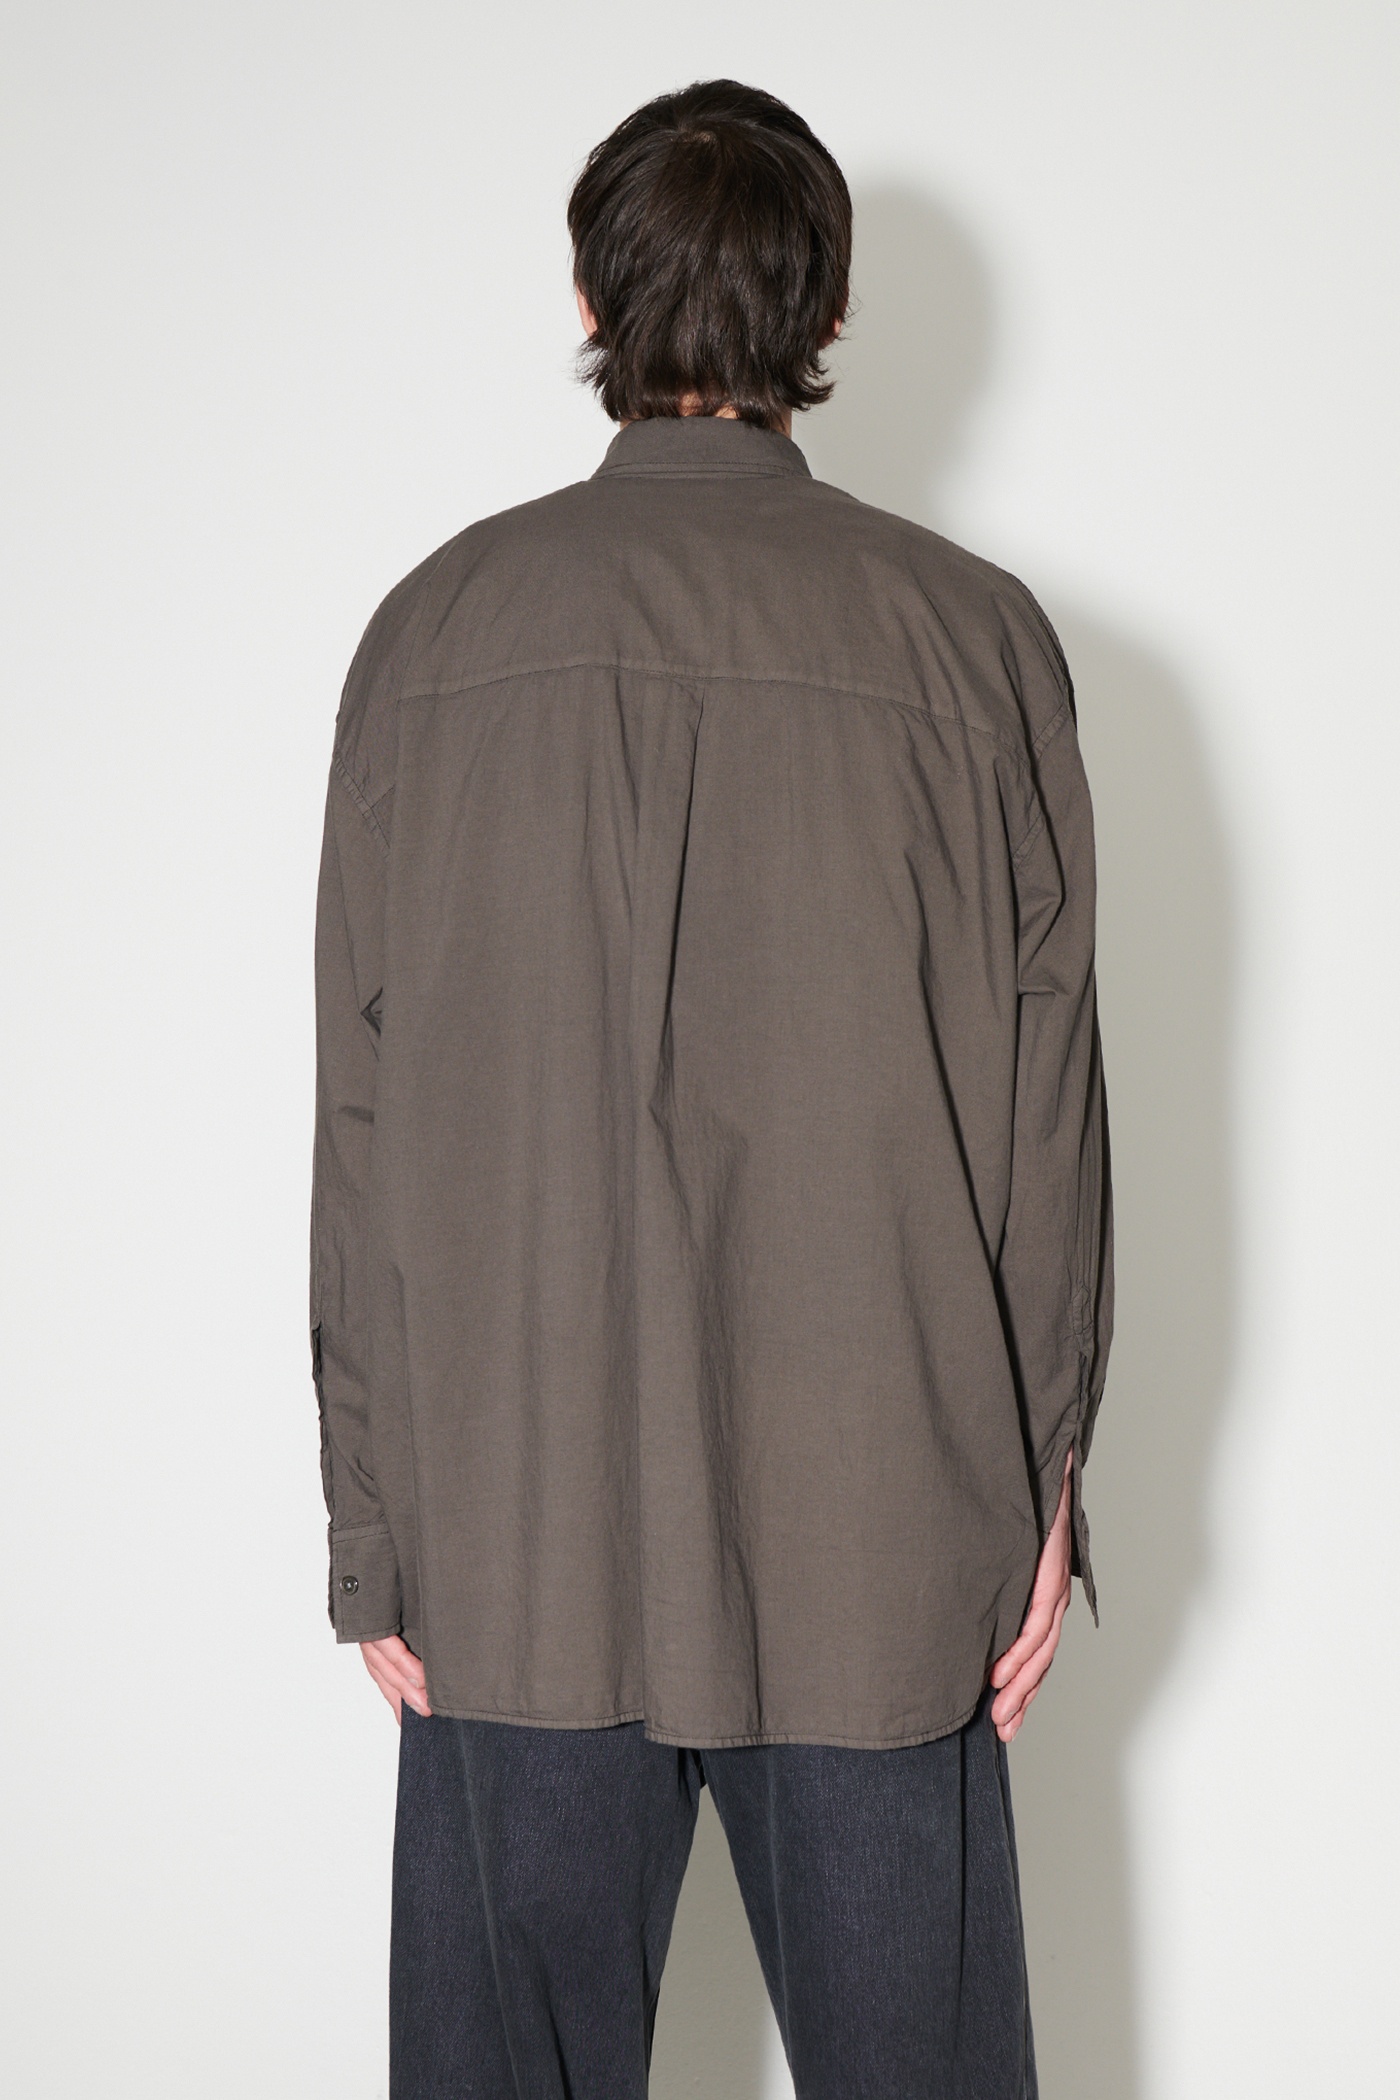 Borrowed BD Shirt Faded Brown Cotton Voile - 5